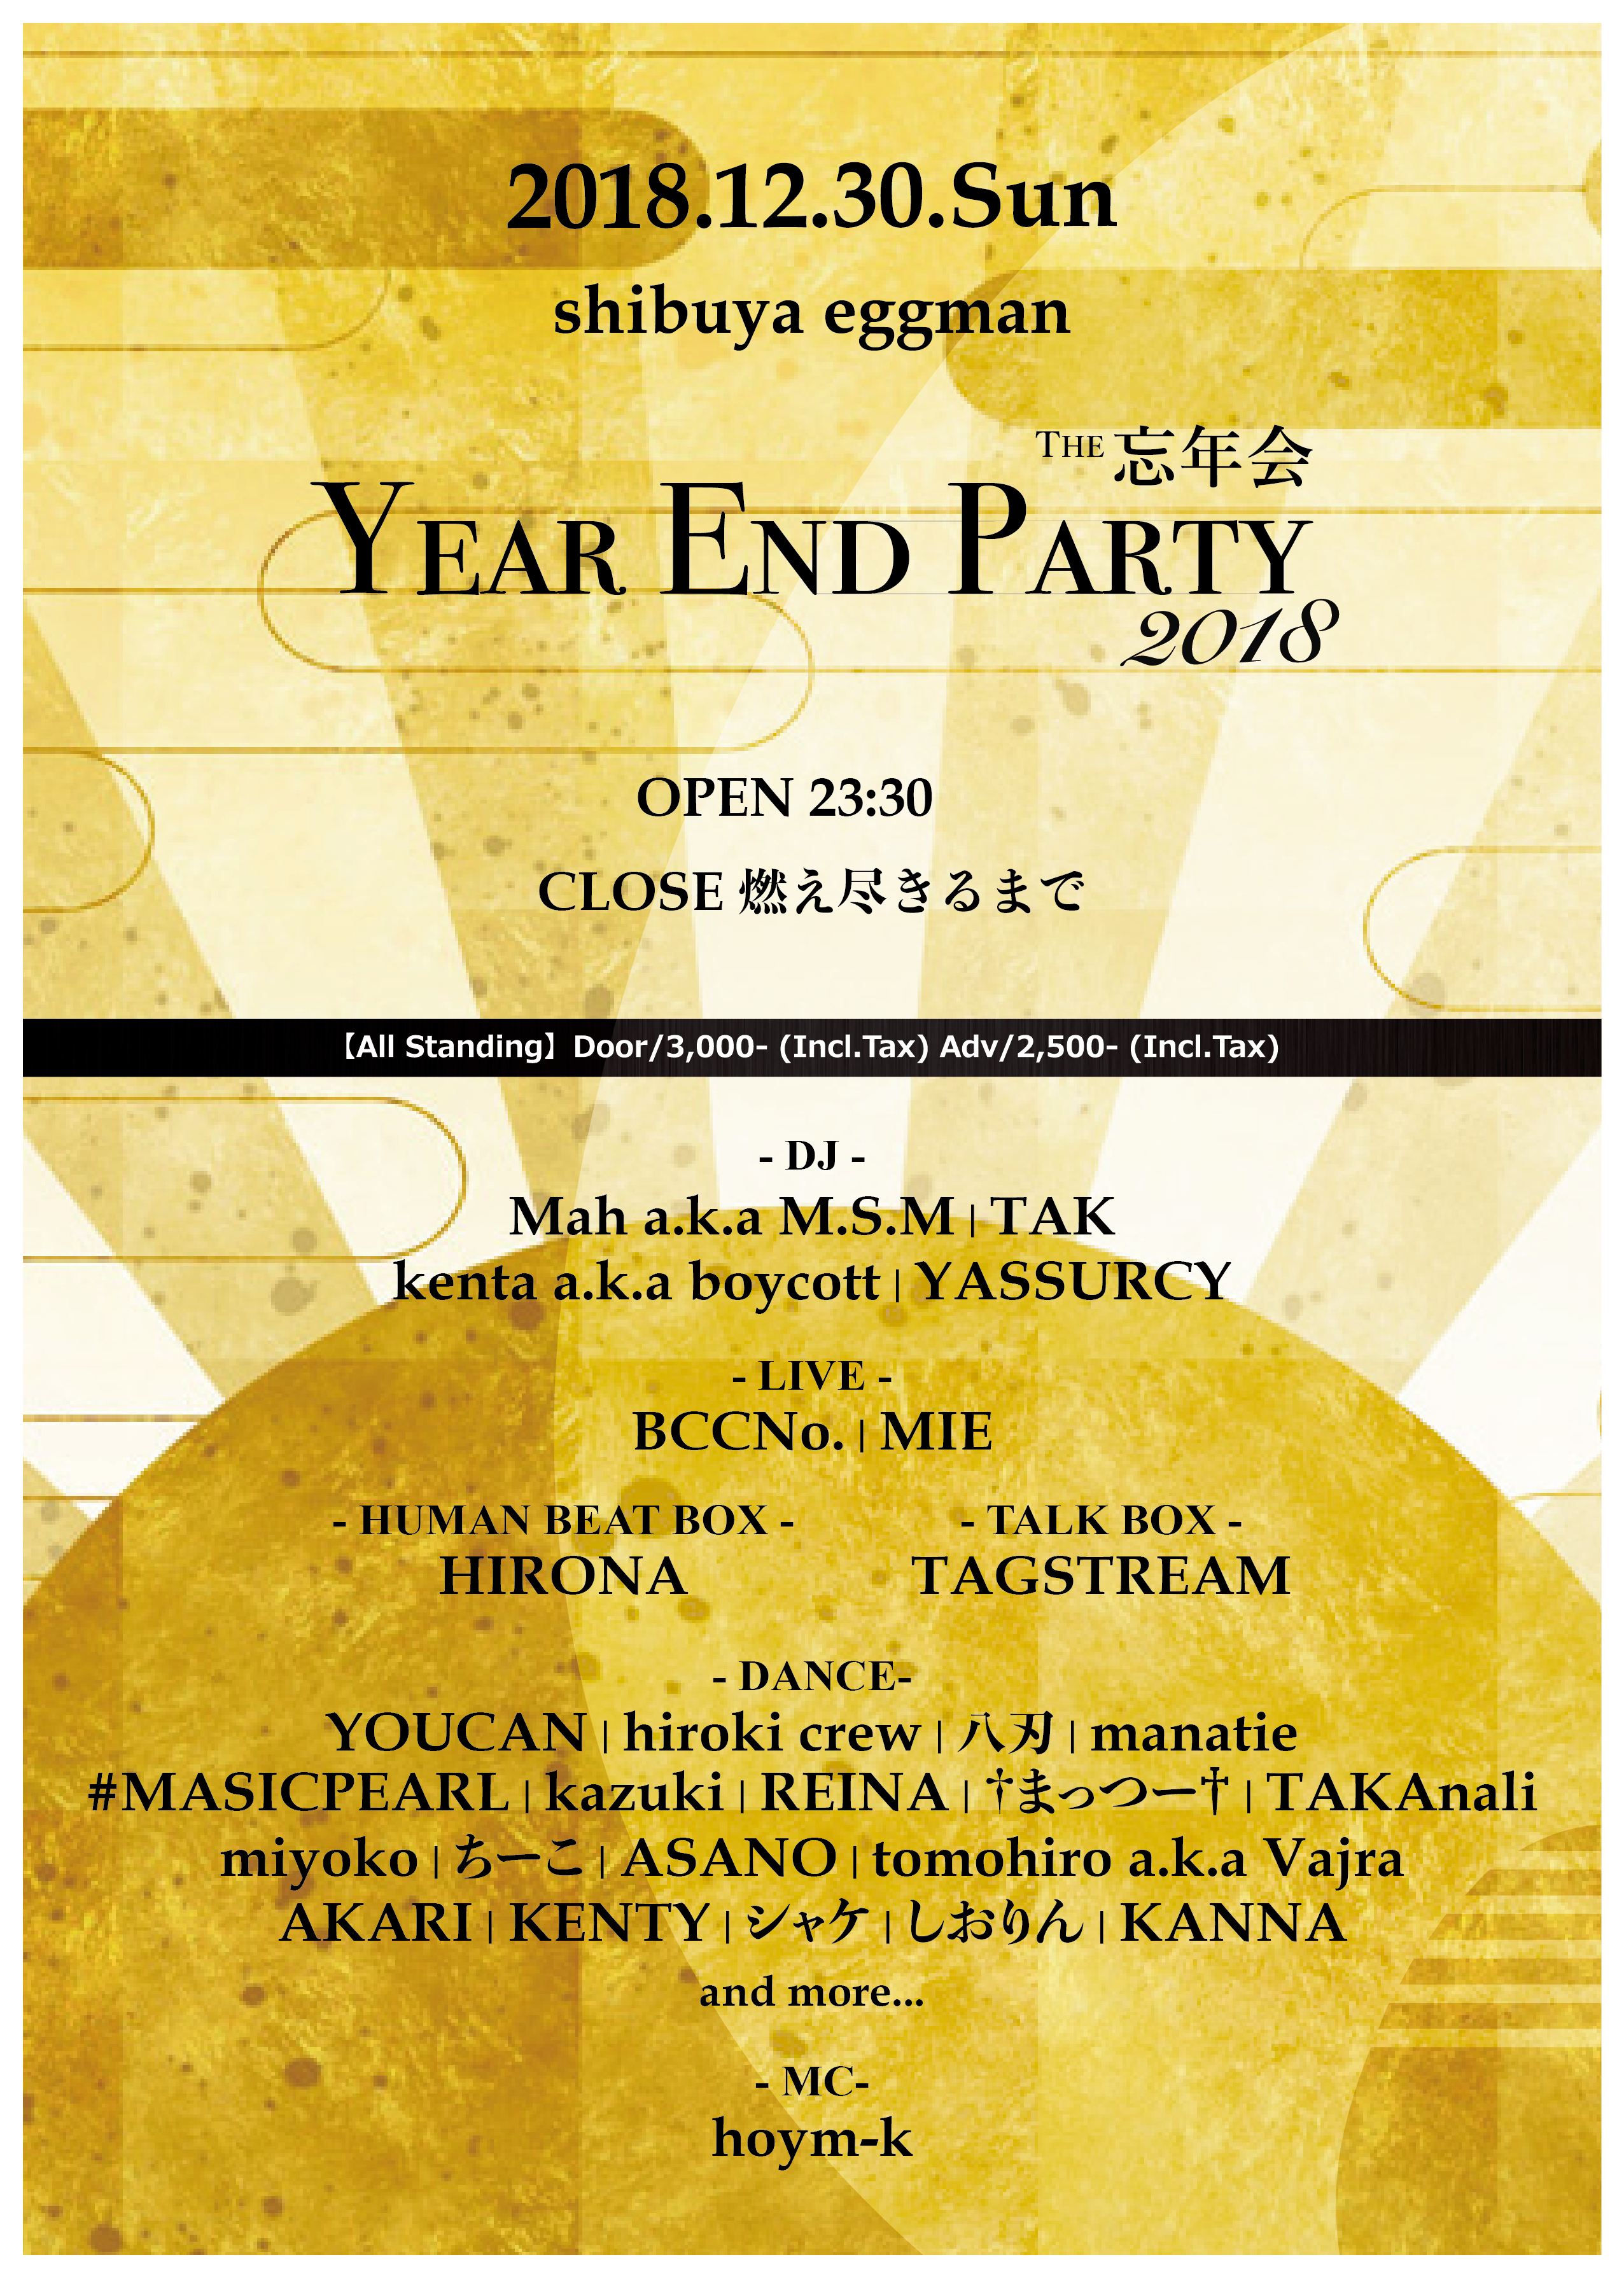 Year End Party 2018